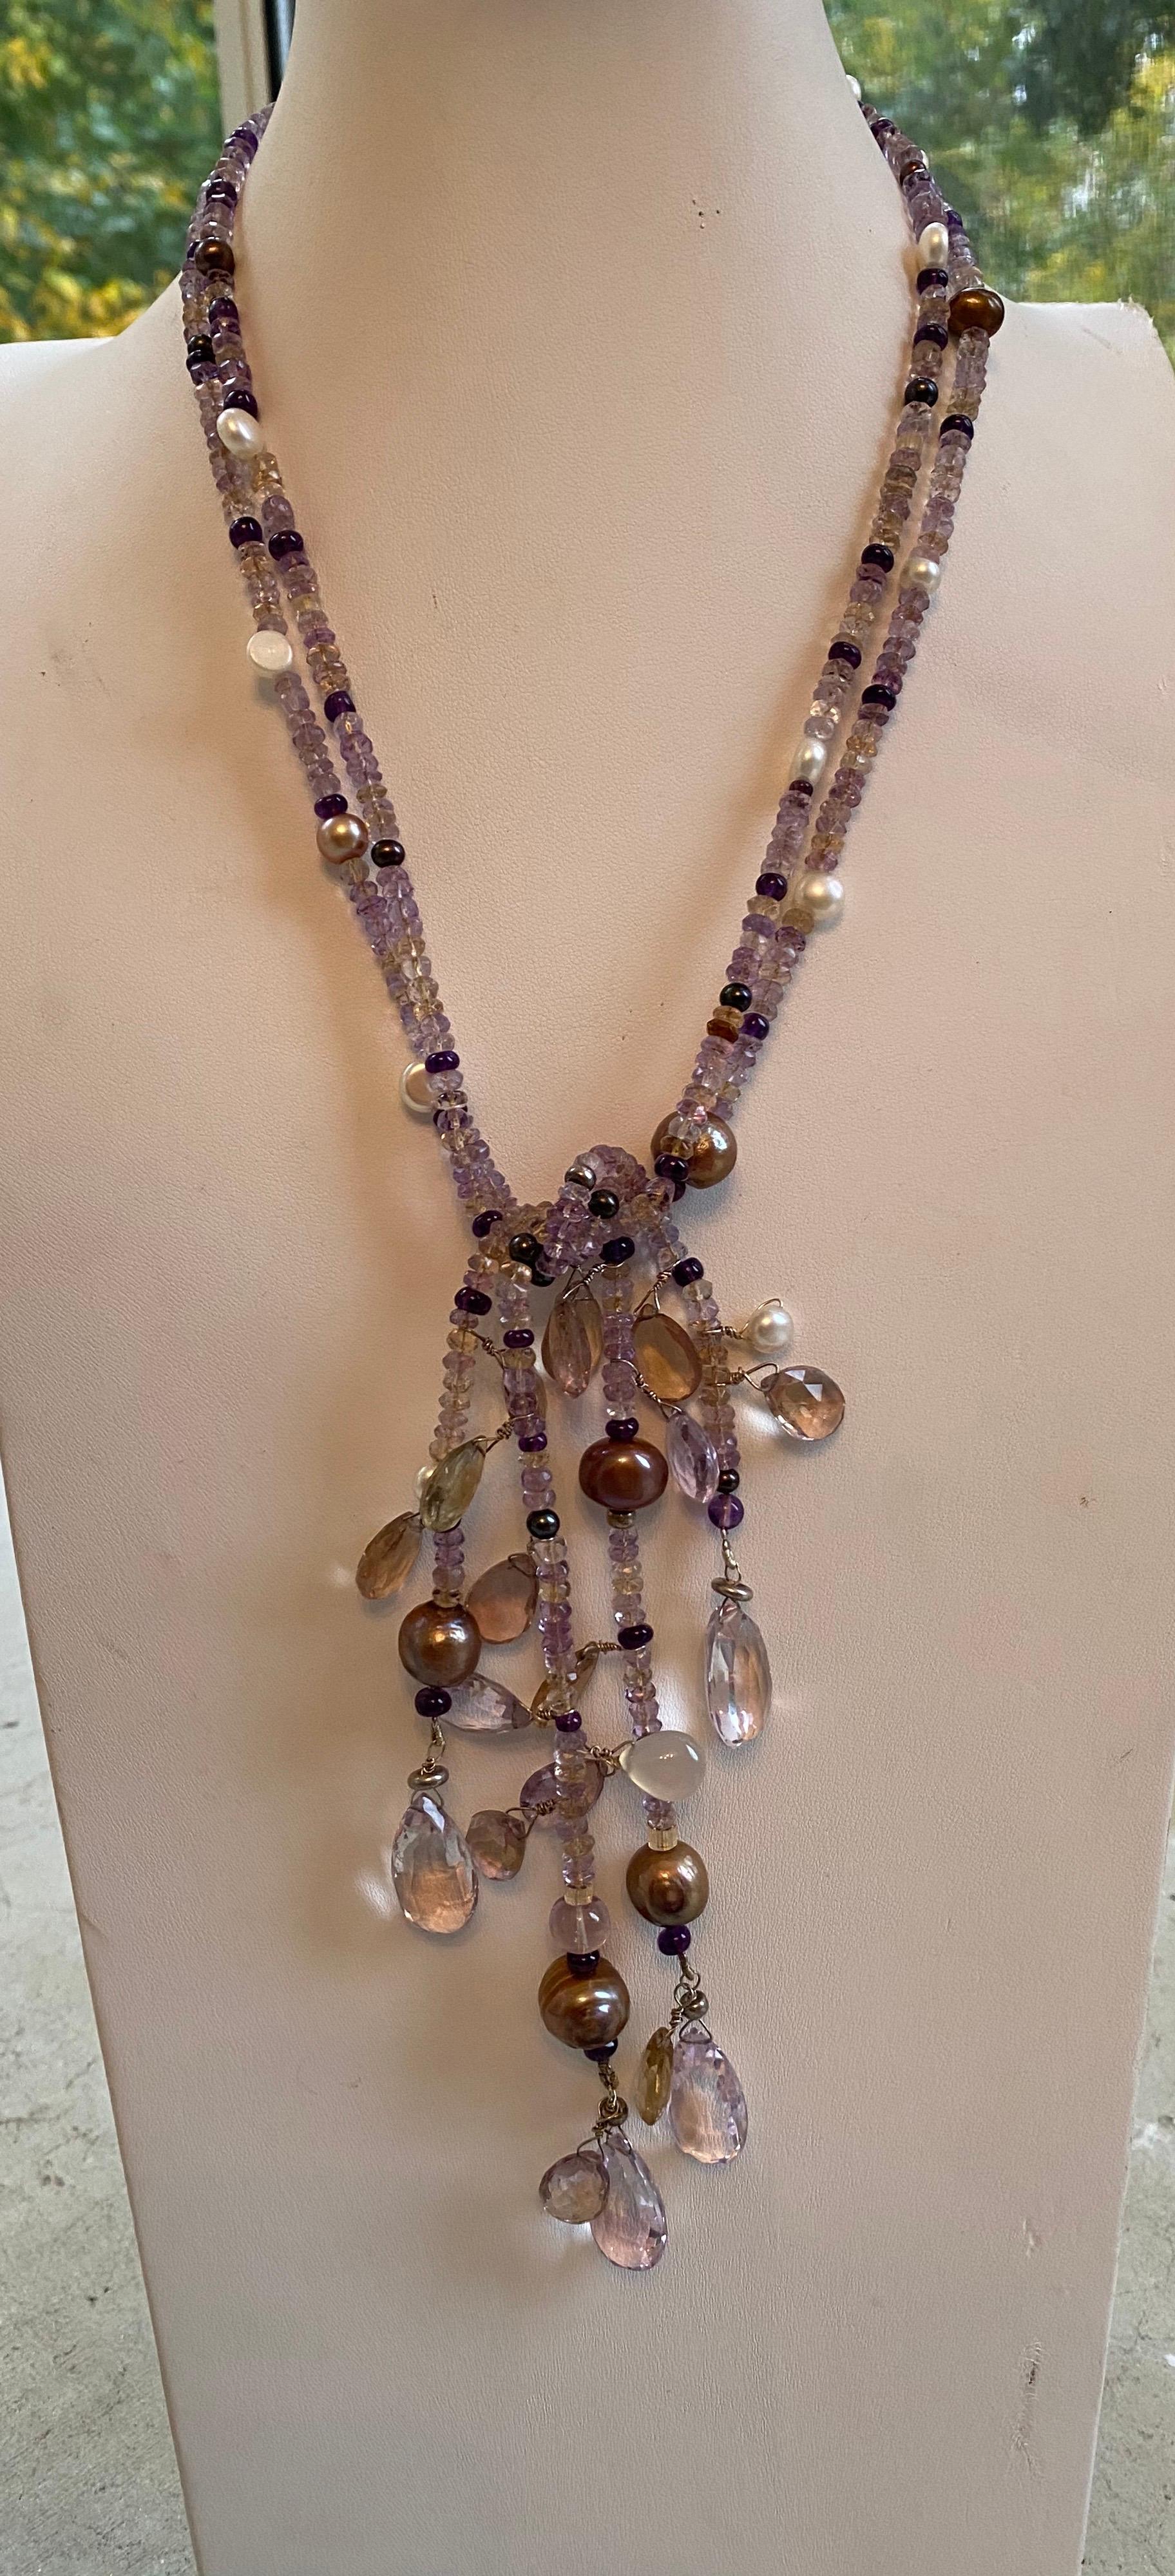 This is a lovely open lariat necklace adorned with Ametrine (Amethysts & Citrines) beads and Briolette Gemstones and White and Brown Freshwater Cultured Pearls throughout. Makes a bold statement of elegance and beauty to the wearer. There is only